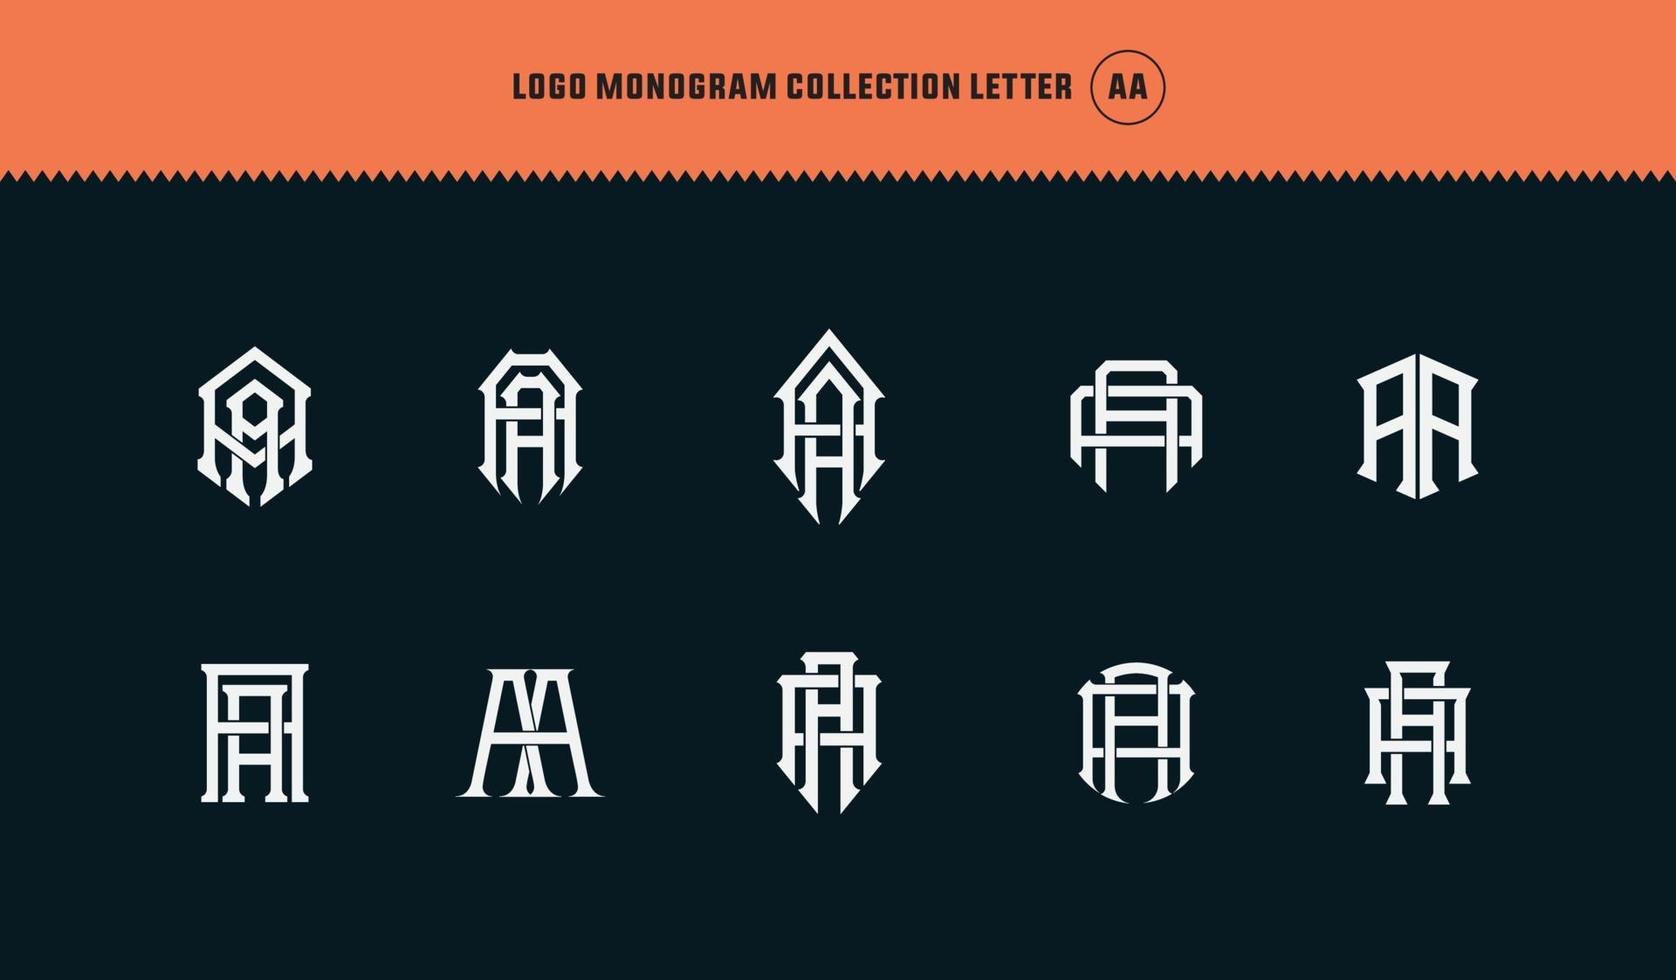 Monogram collection letter AA with interlock style good for clothing, apparel, streetwear, baseball, basketball, football and etc vector